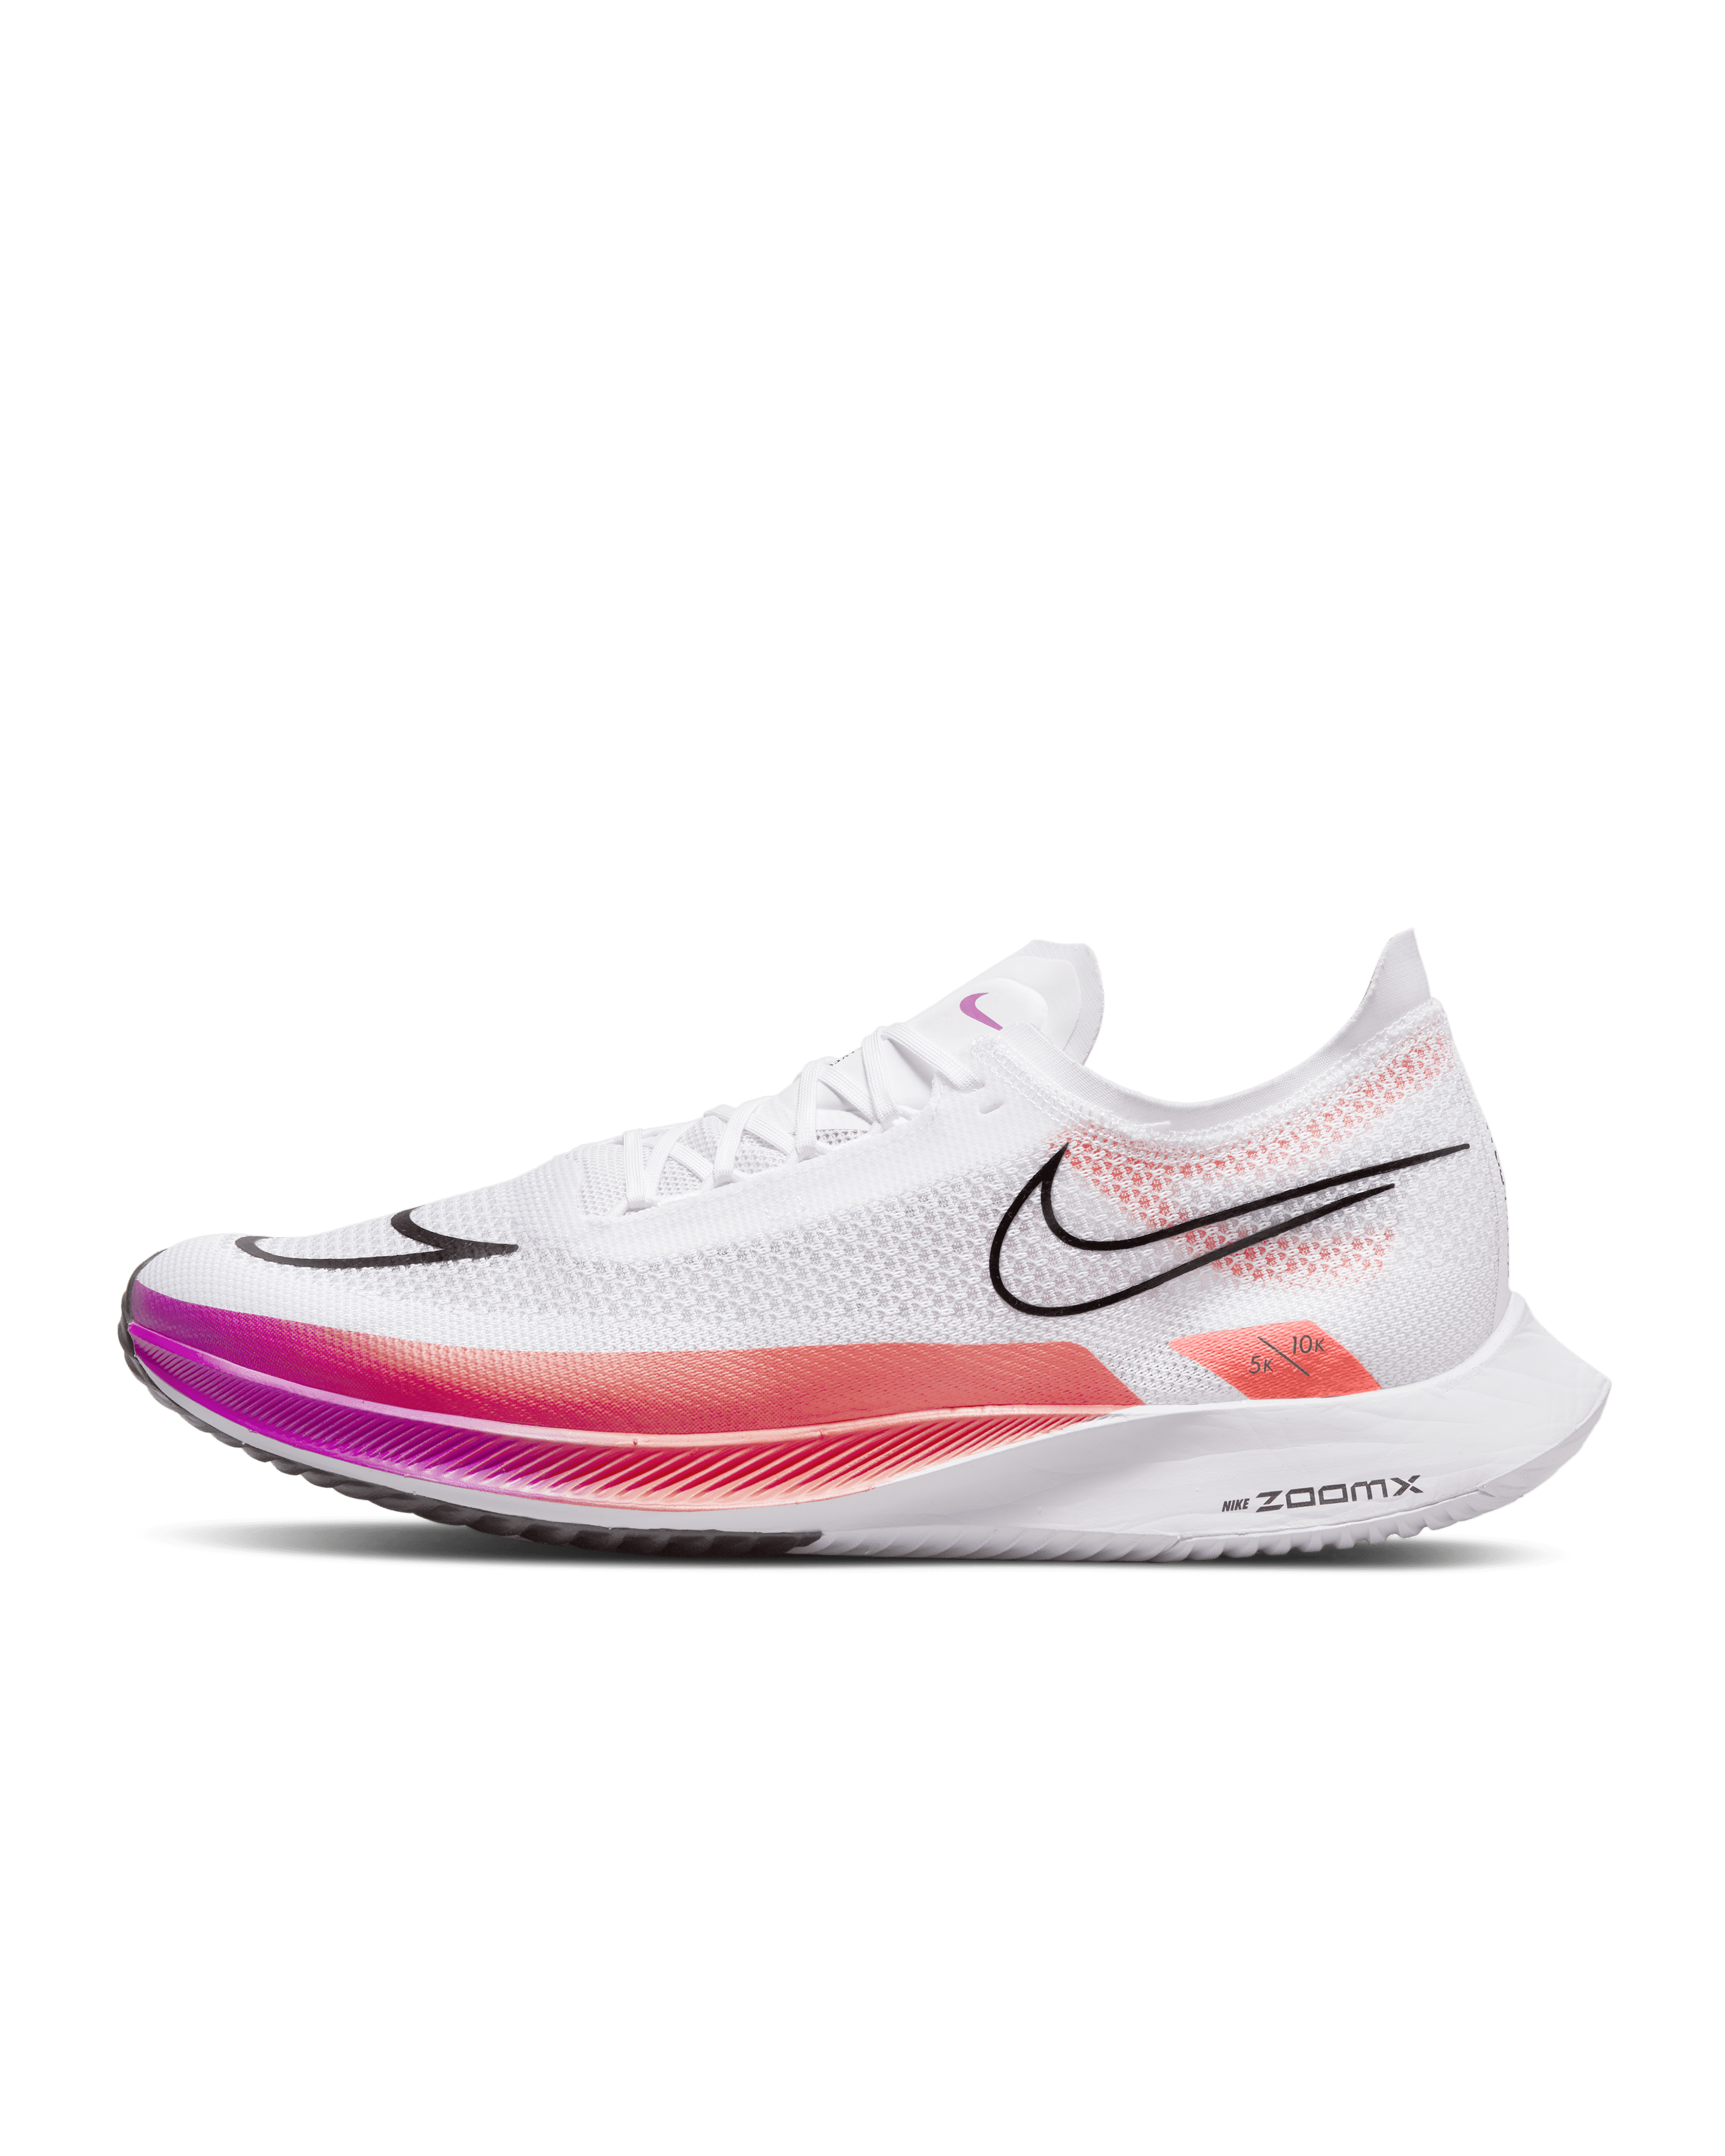 9 Best Nike running shoes 2022 - authentic nike tuned air shoes 